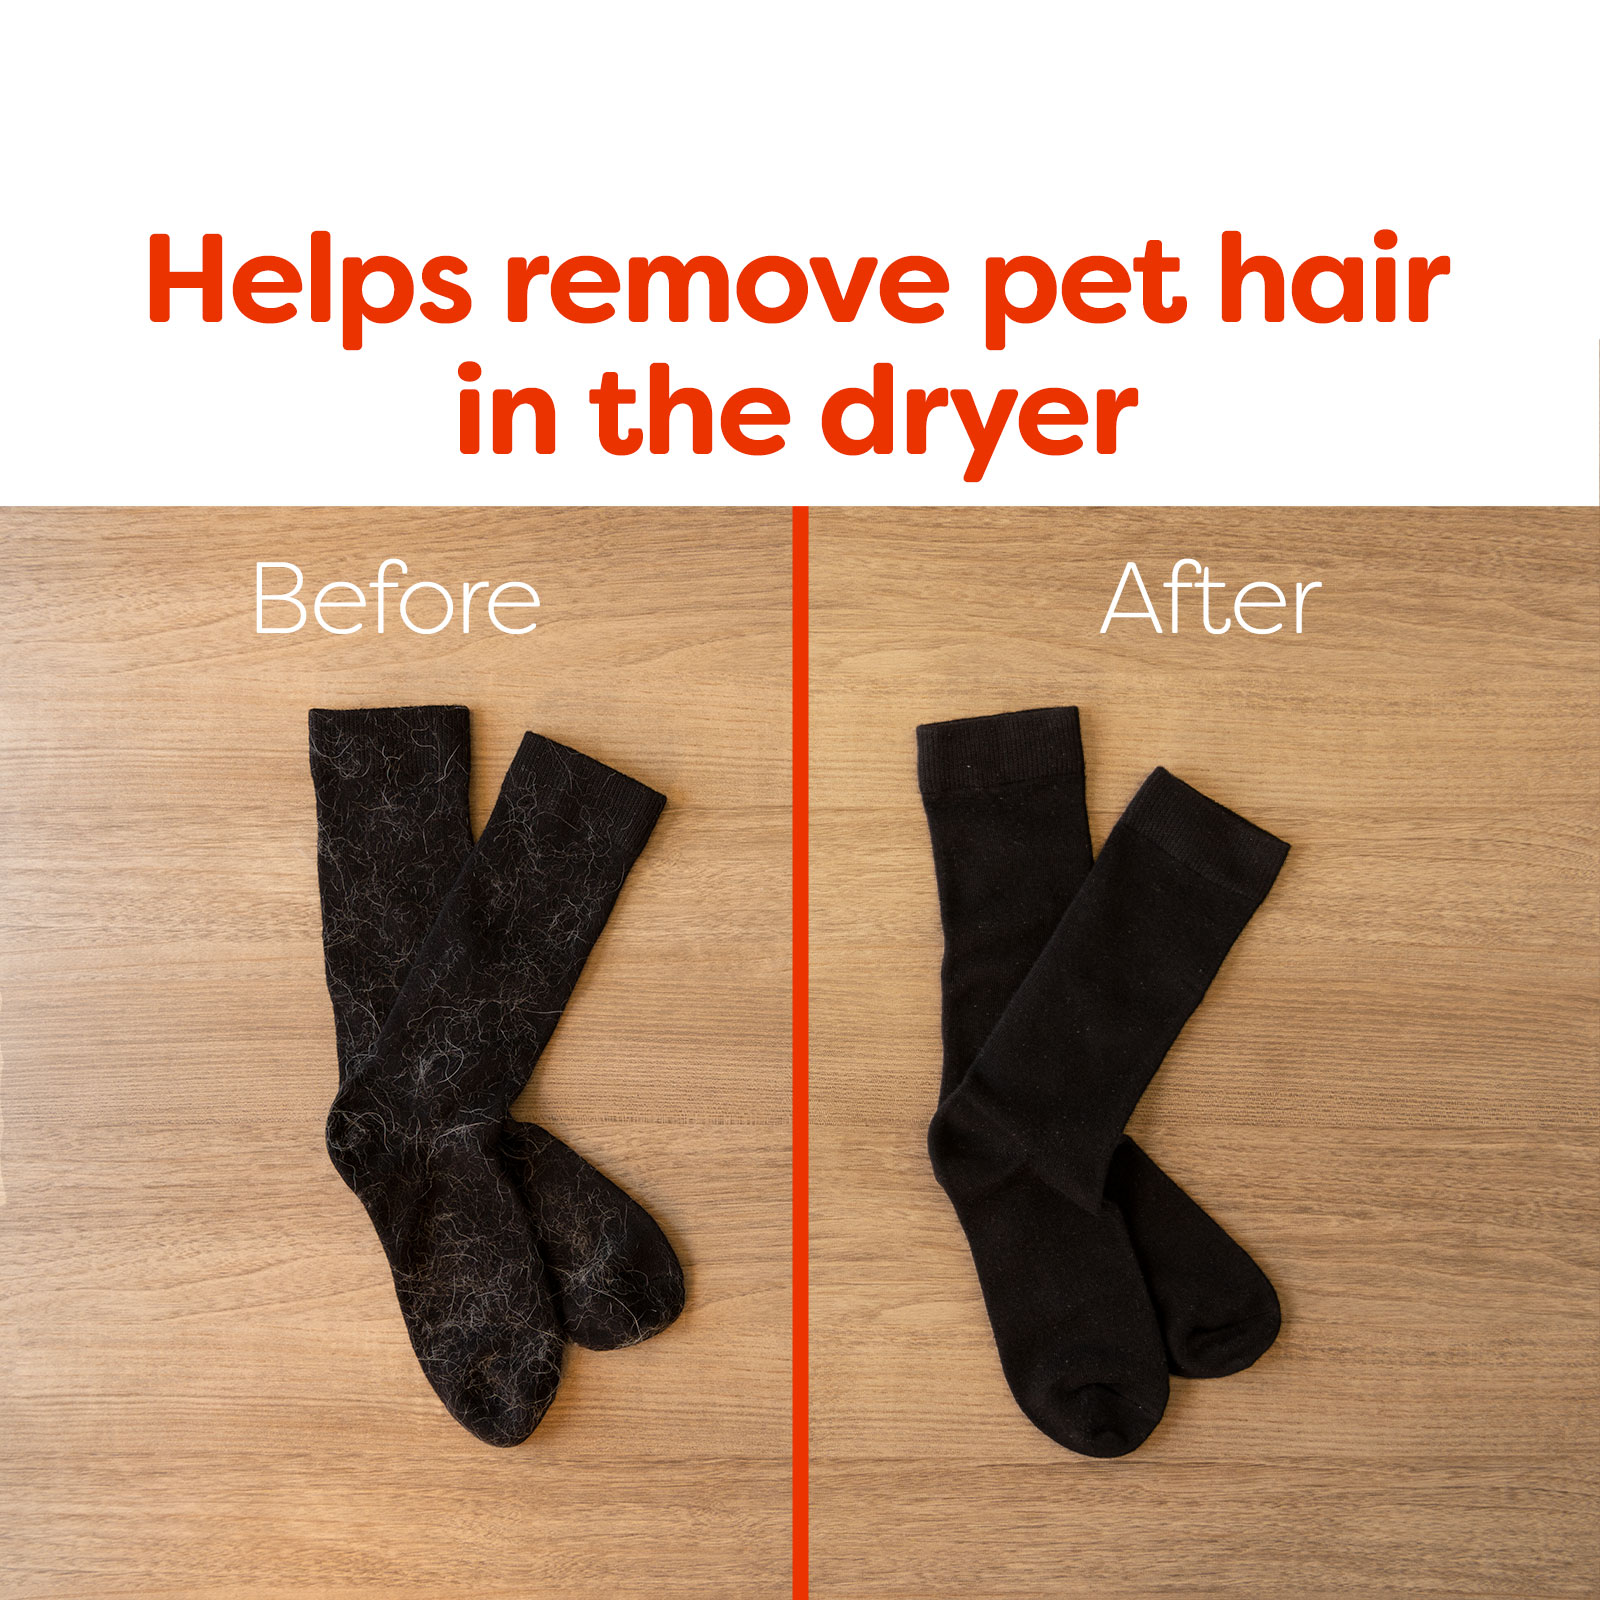 How to Remove Lint From Socks & Prevent Lint